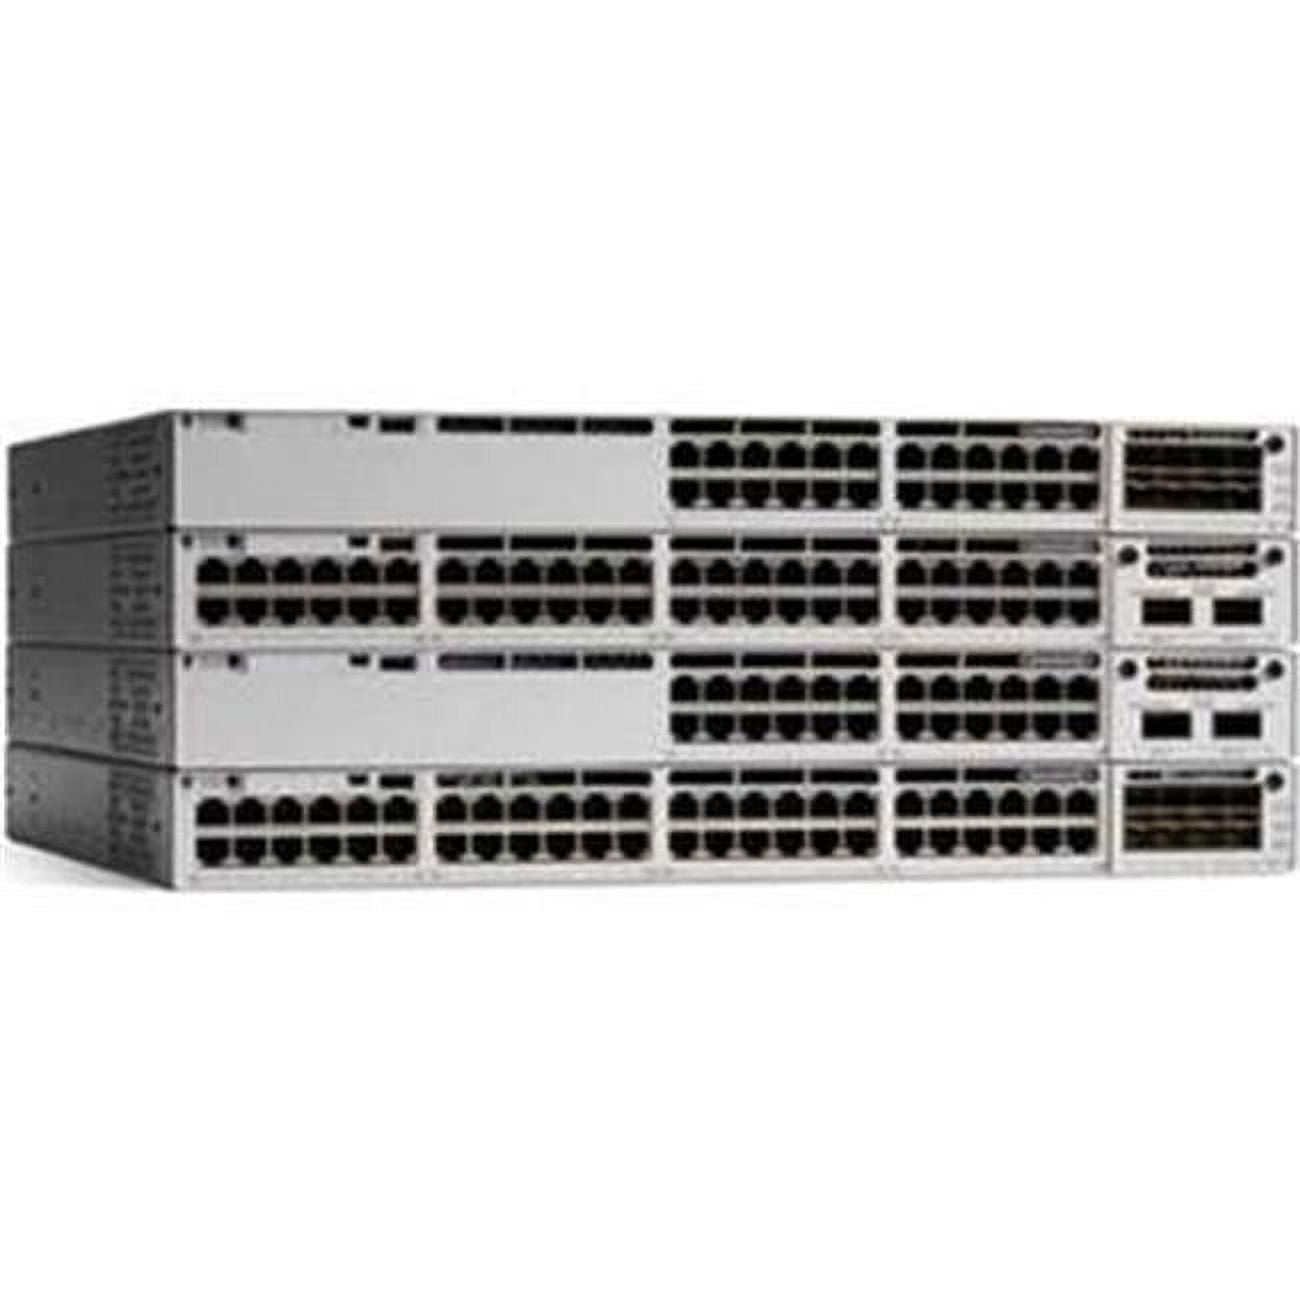 Picture of Cisco C9300-24P-E Catalyst 9300 24-Port PoE Plus Switch with Network Essentials